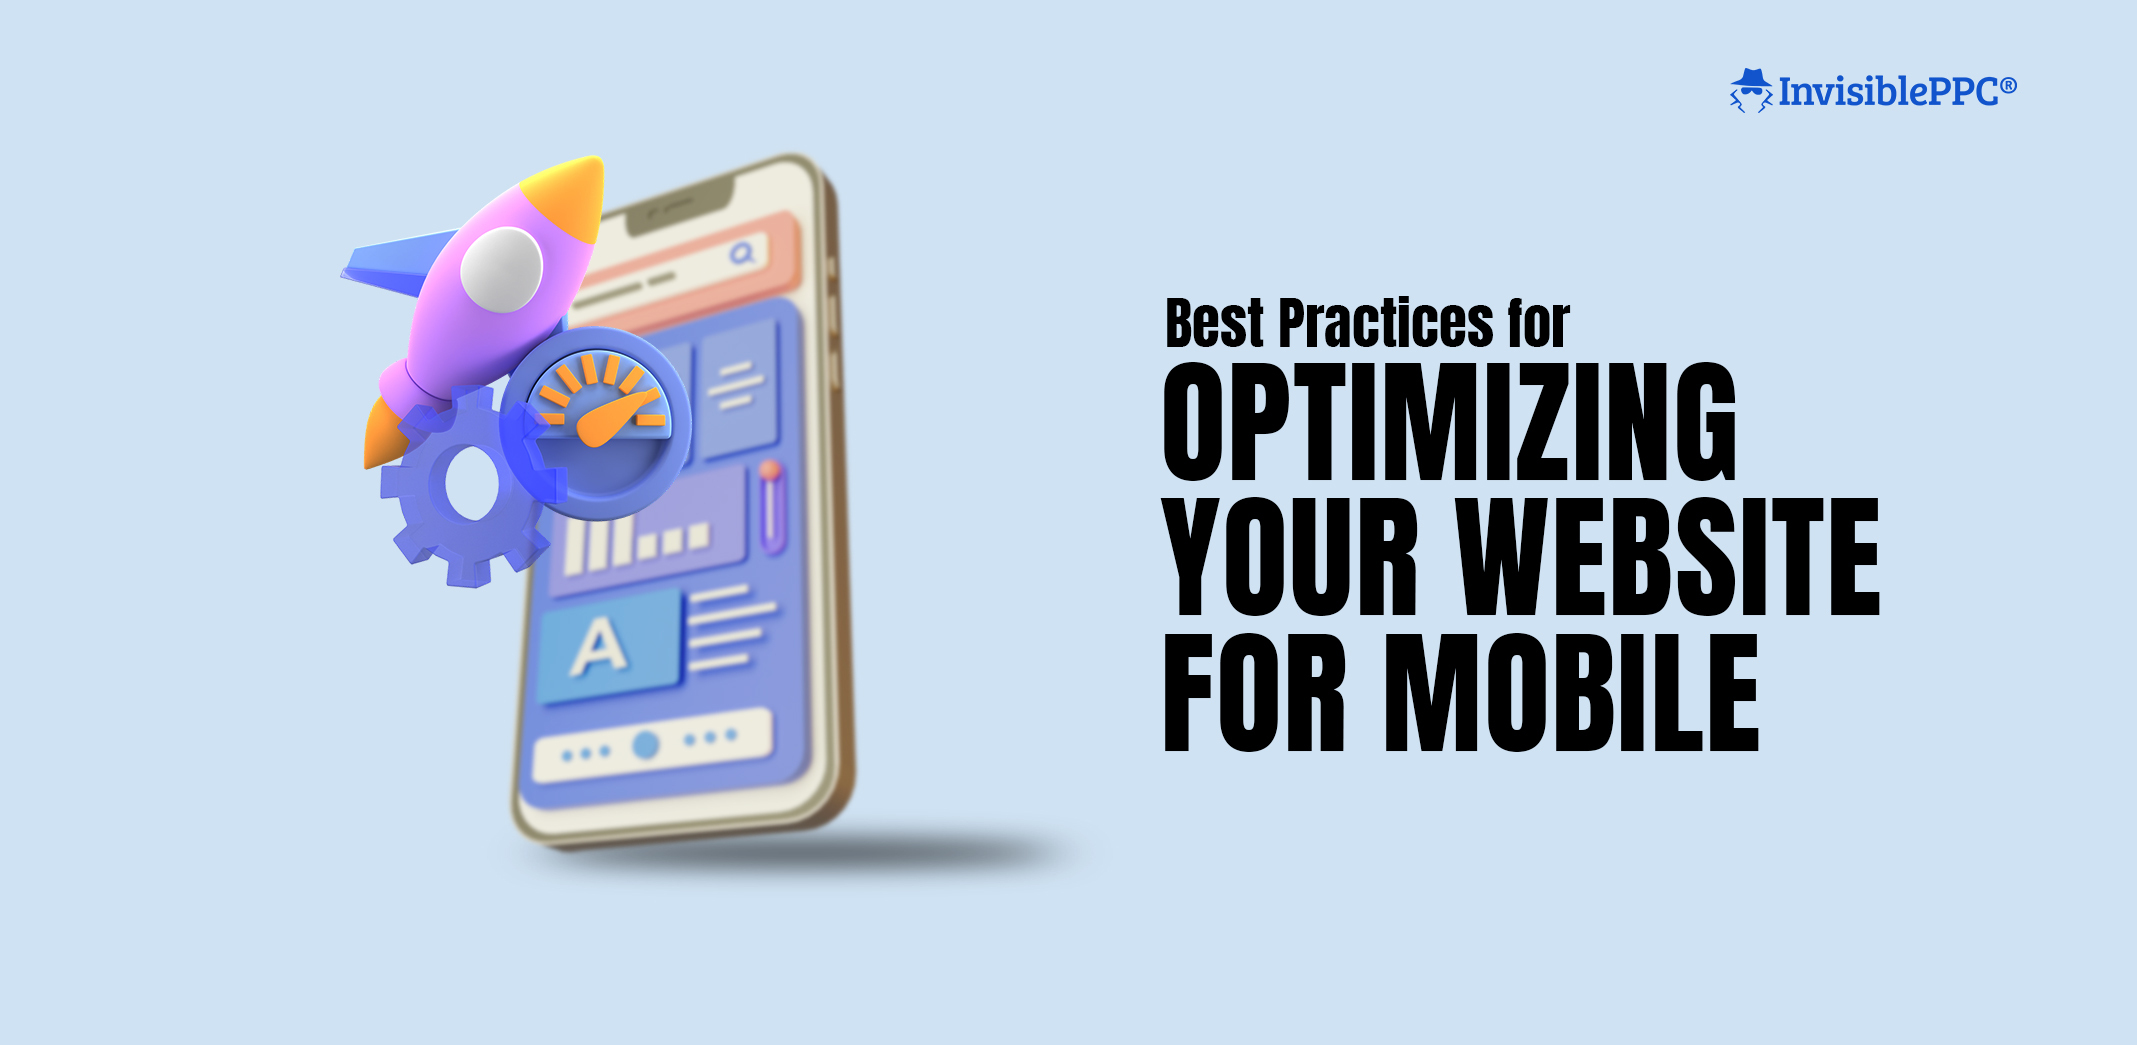 Best Practices for Optimizing Your Website for Mobile